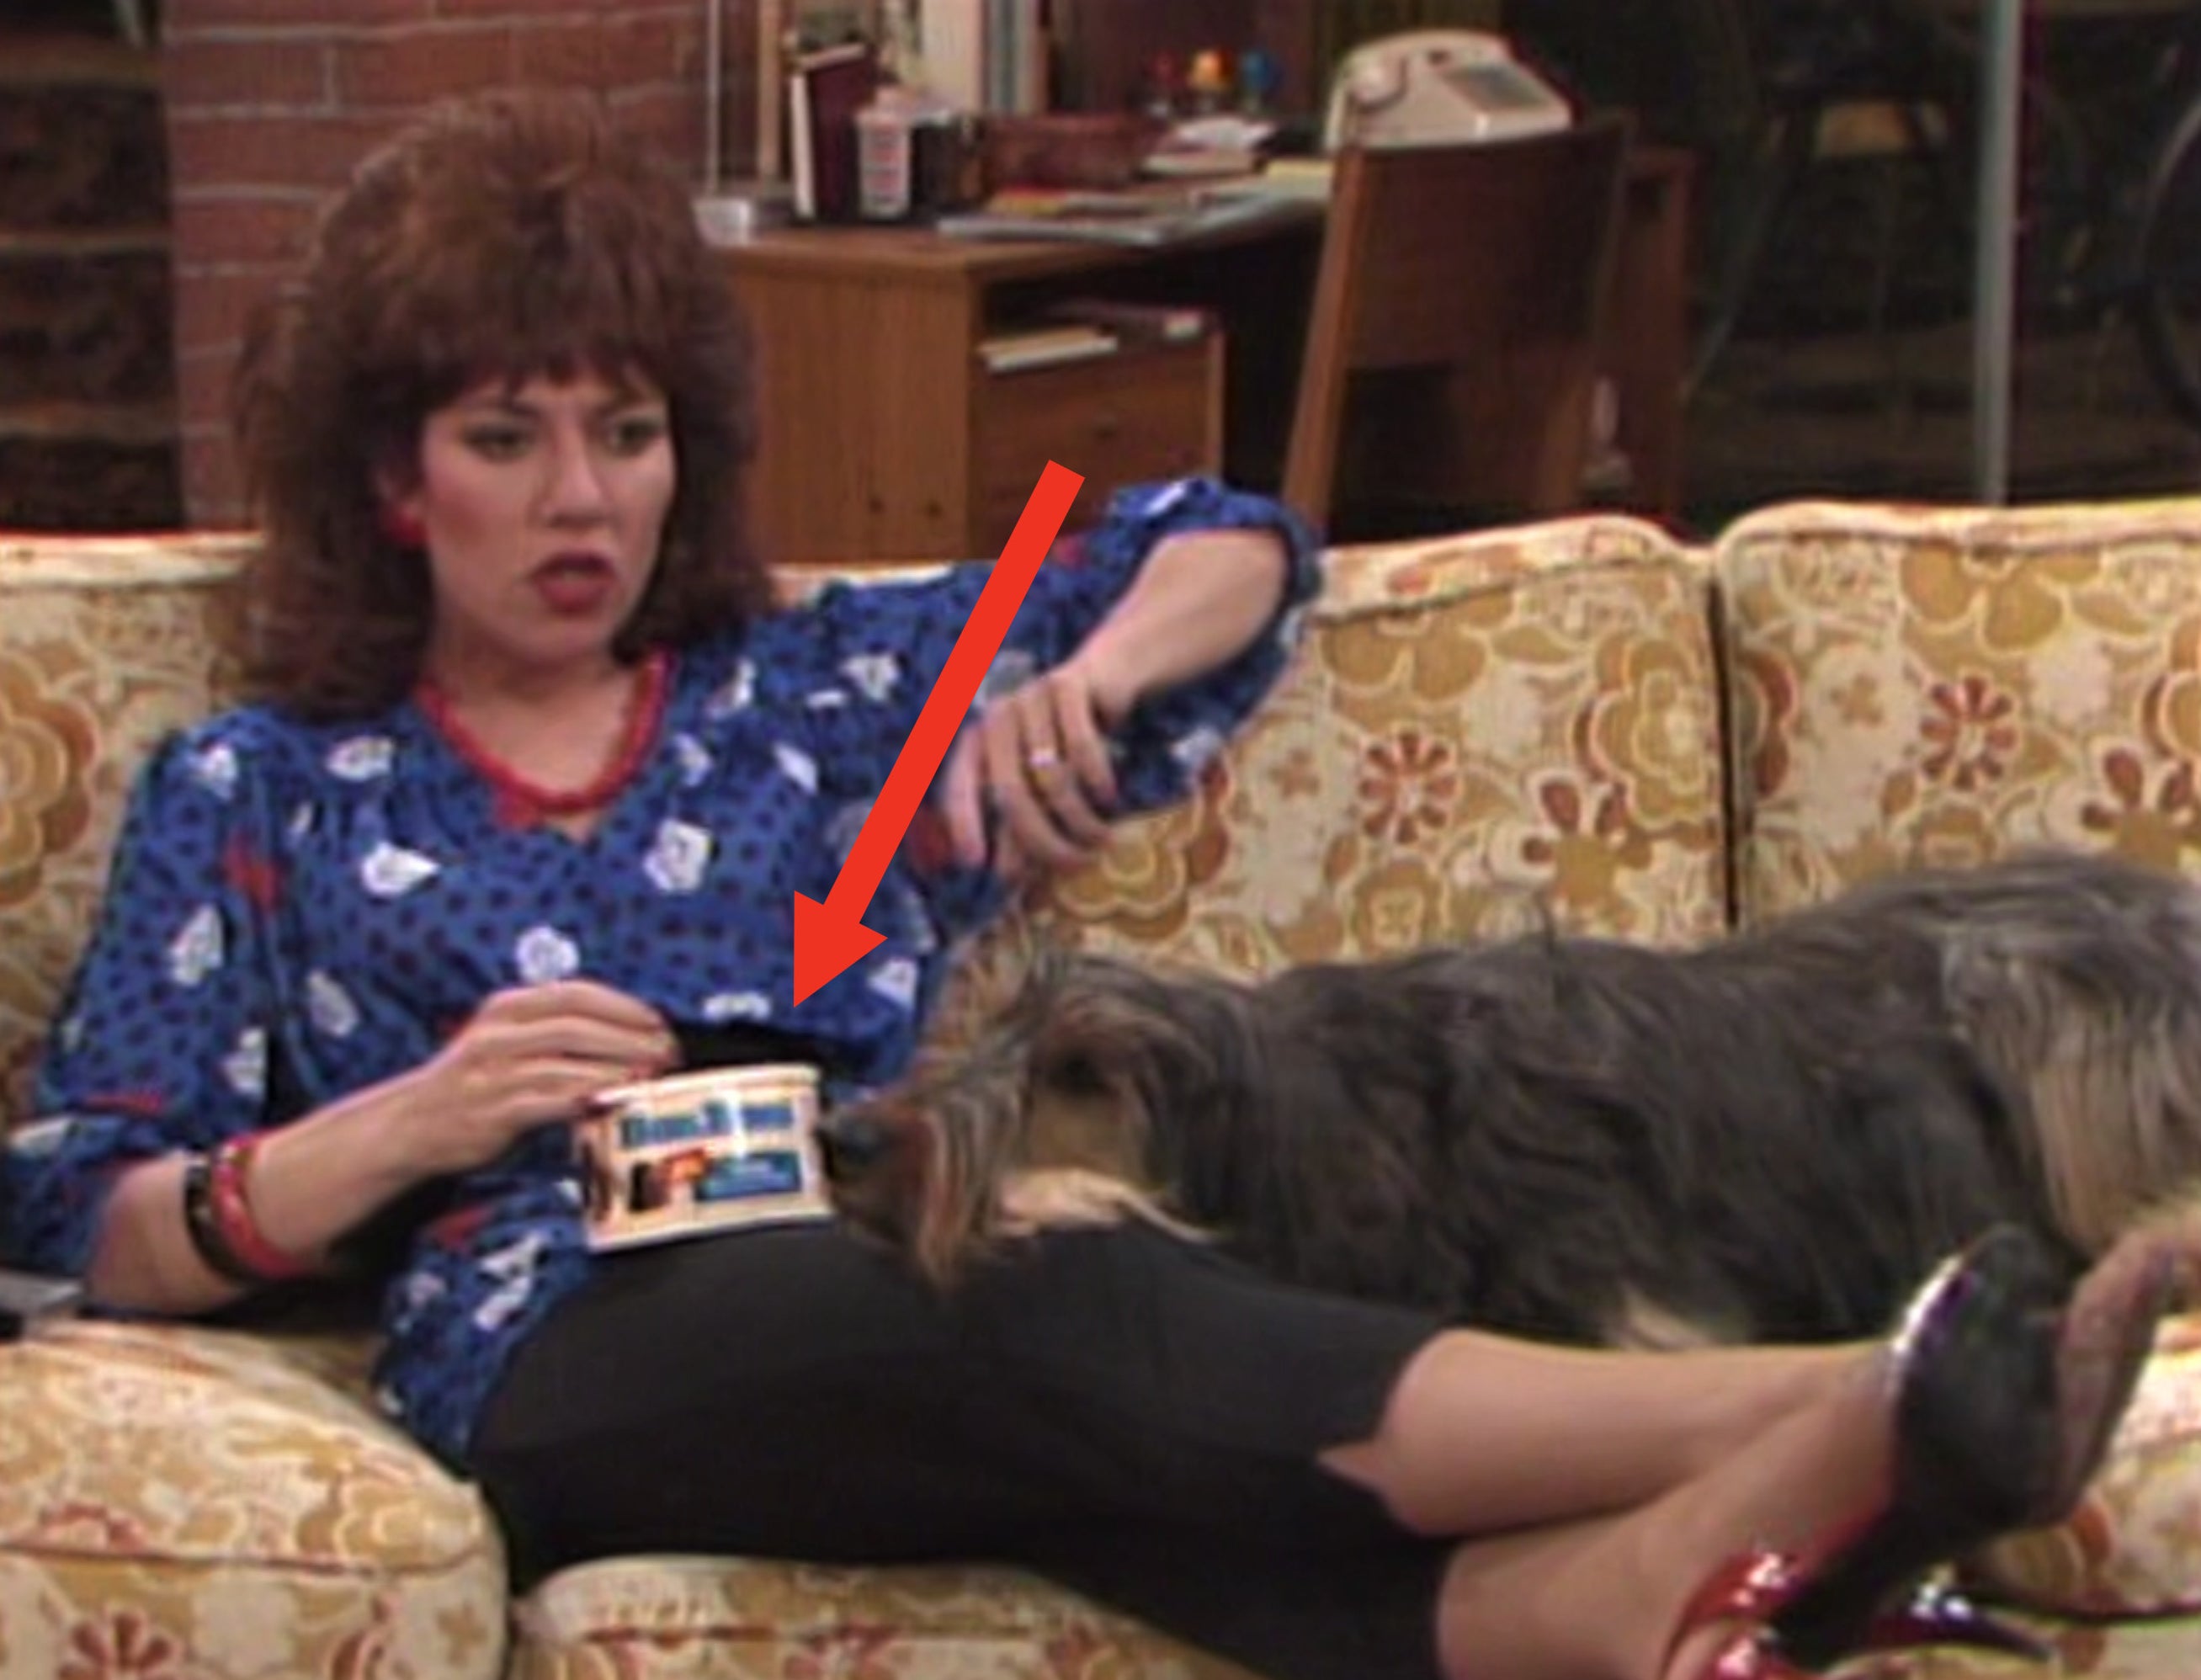 Peggy Bundy from &quot;Married With Children&quot; with feet up eating a tub of BonBons